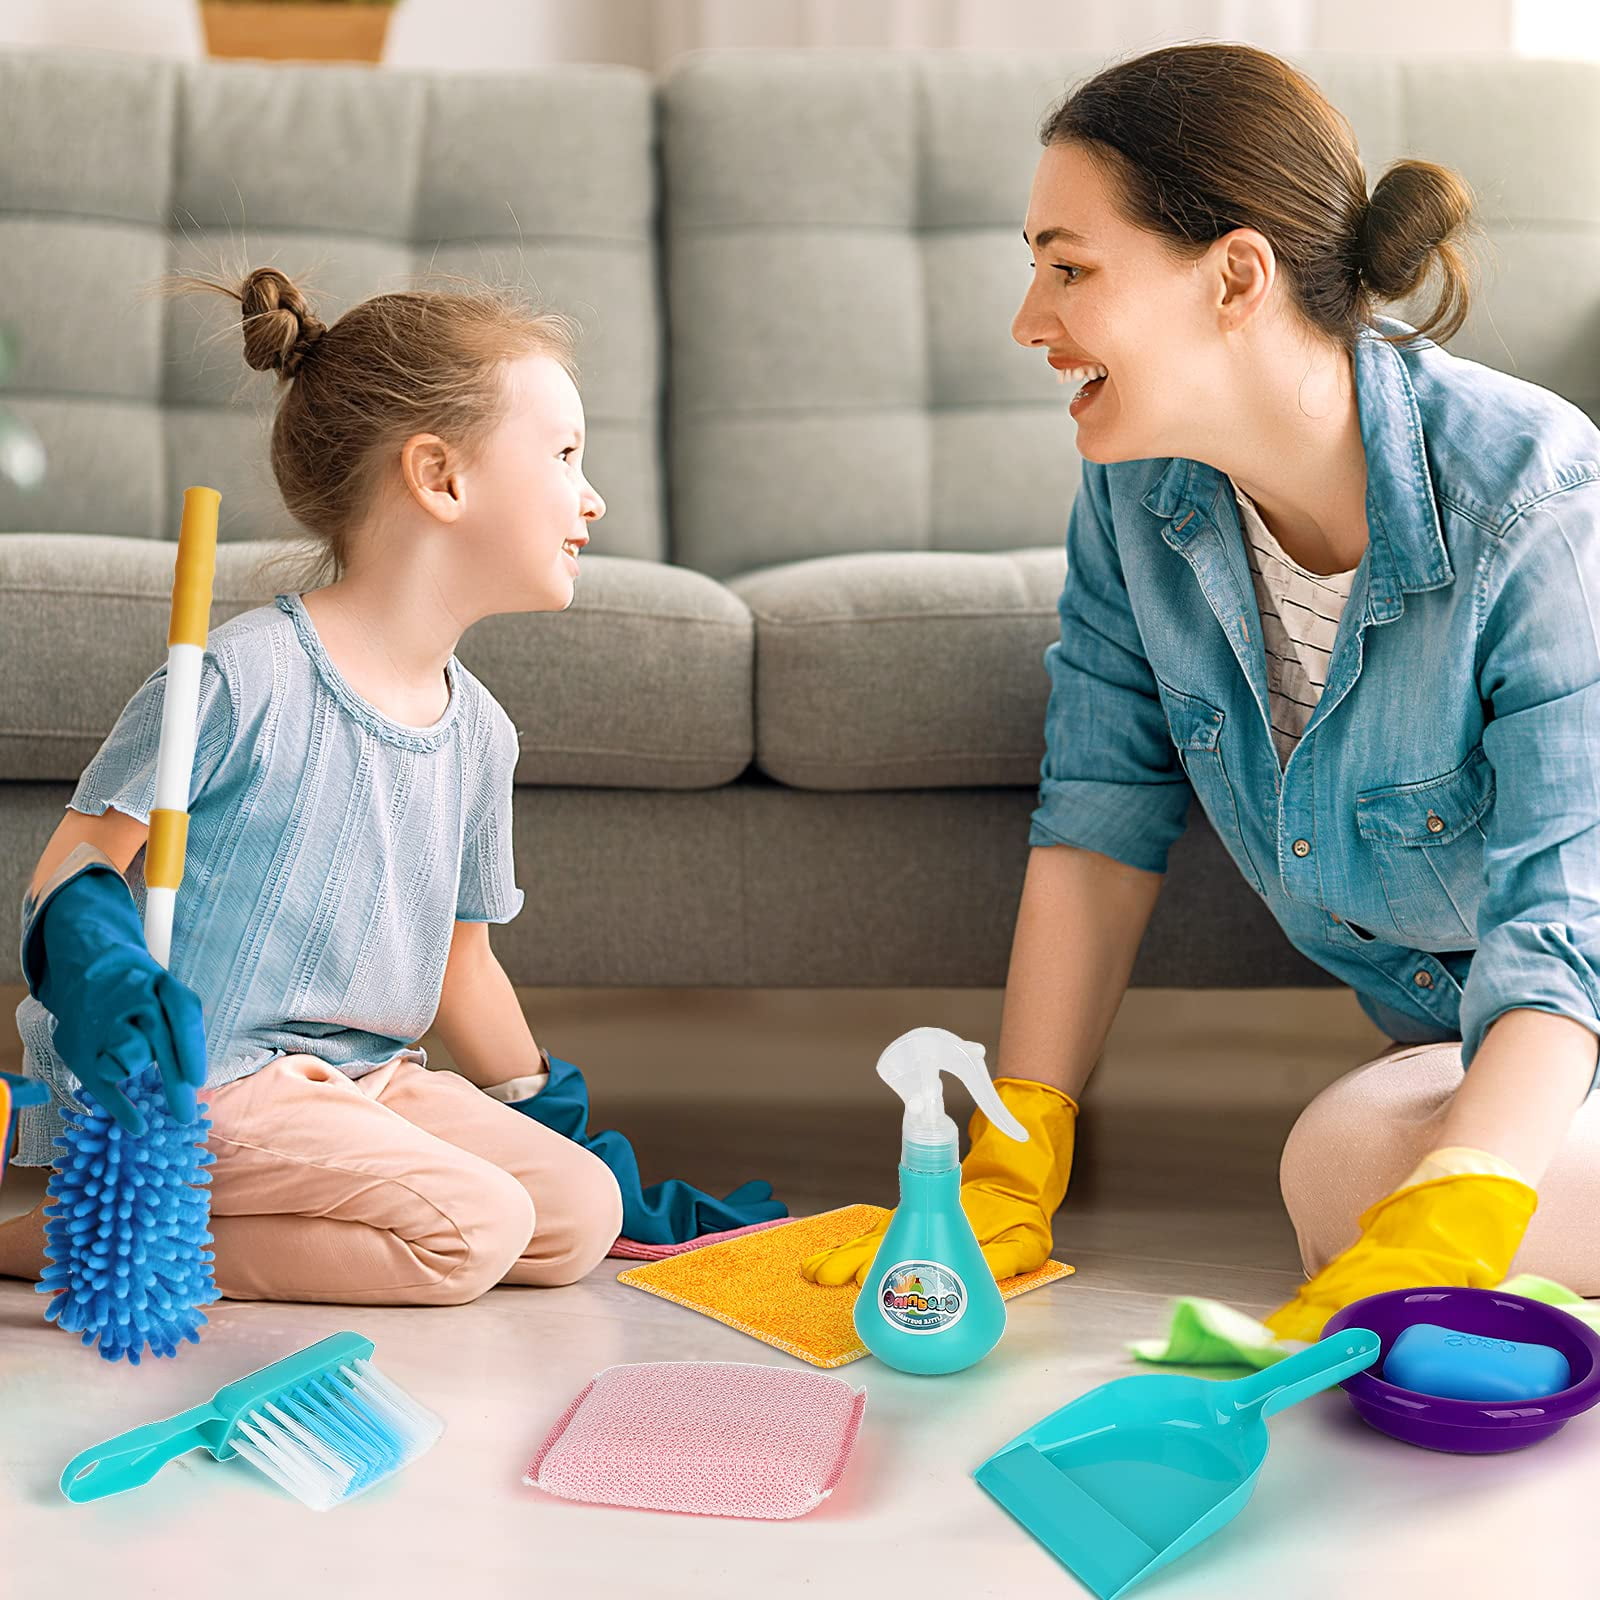  Kids Cleaning Set for Toddlers, Pretend Play Housekeeping  Supplies Kit for Boys and Girls Complete with Broom, Mop, Dust Pan, Spray  Bottle and More, Little Helper Tools and Montessori Toys 